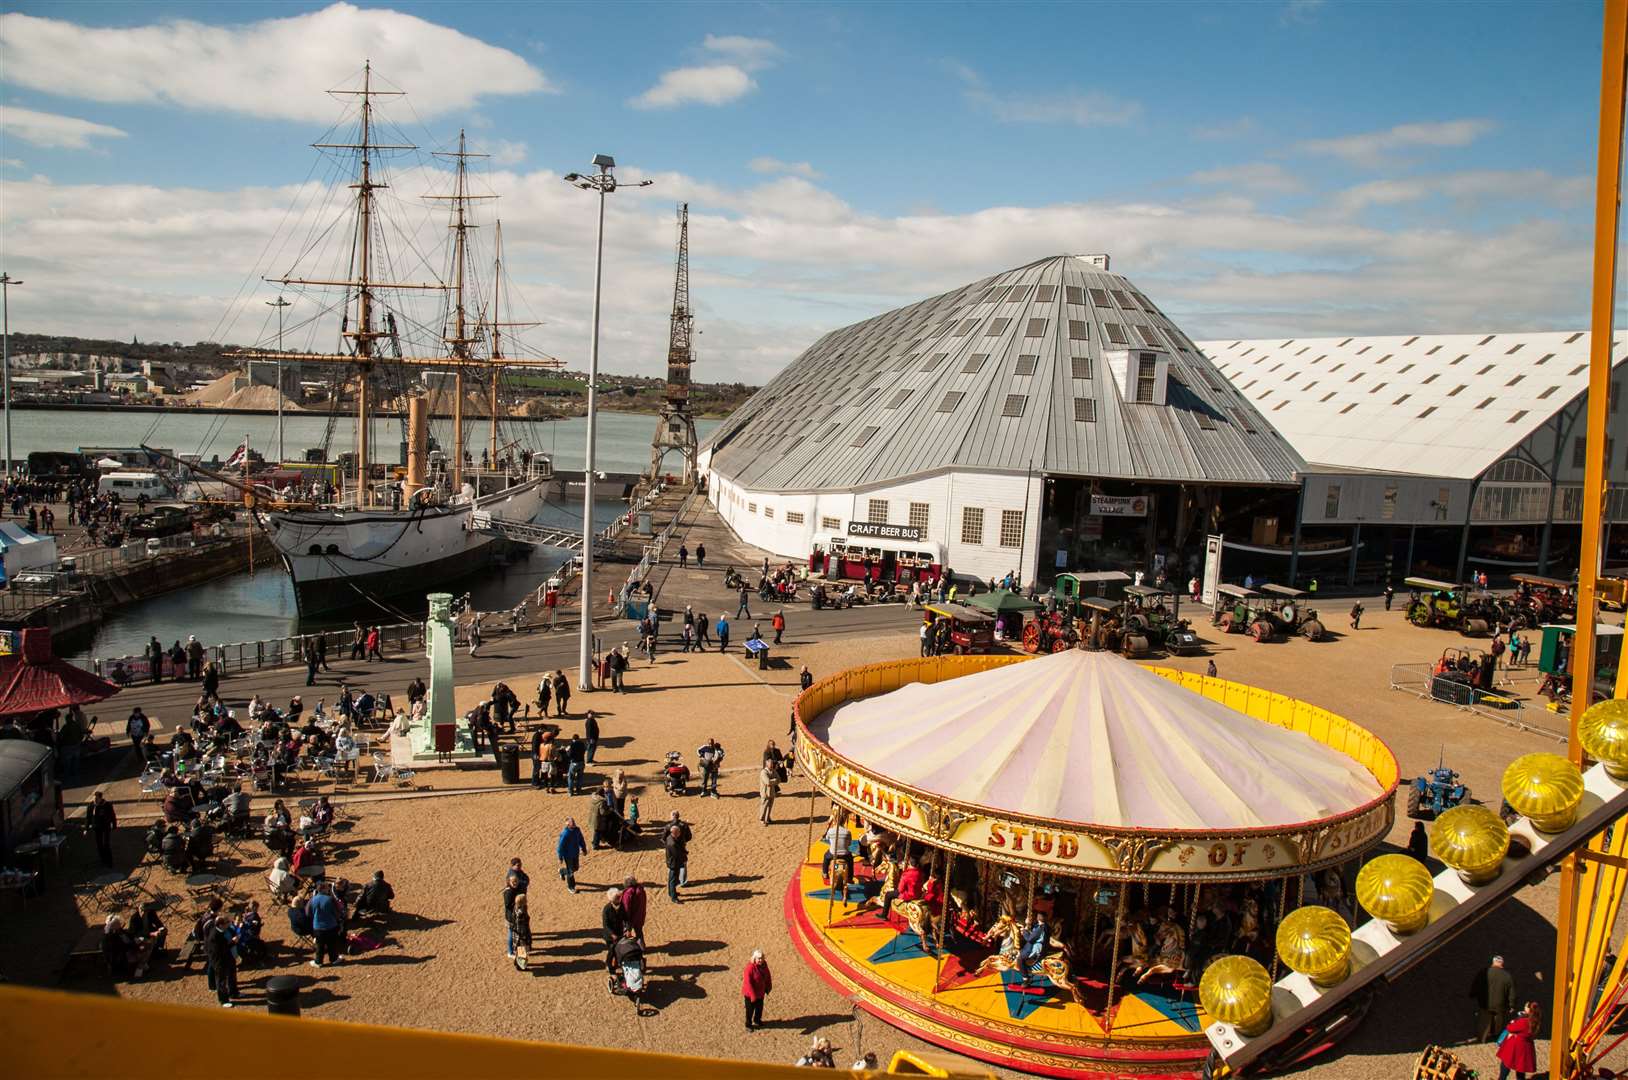 Chatham Historic Dockyard's Festival of Steam and Transport is a big event in the venue's calendar